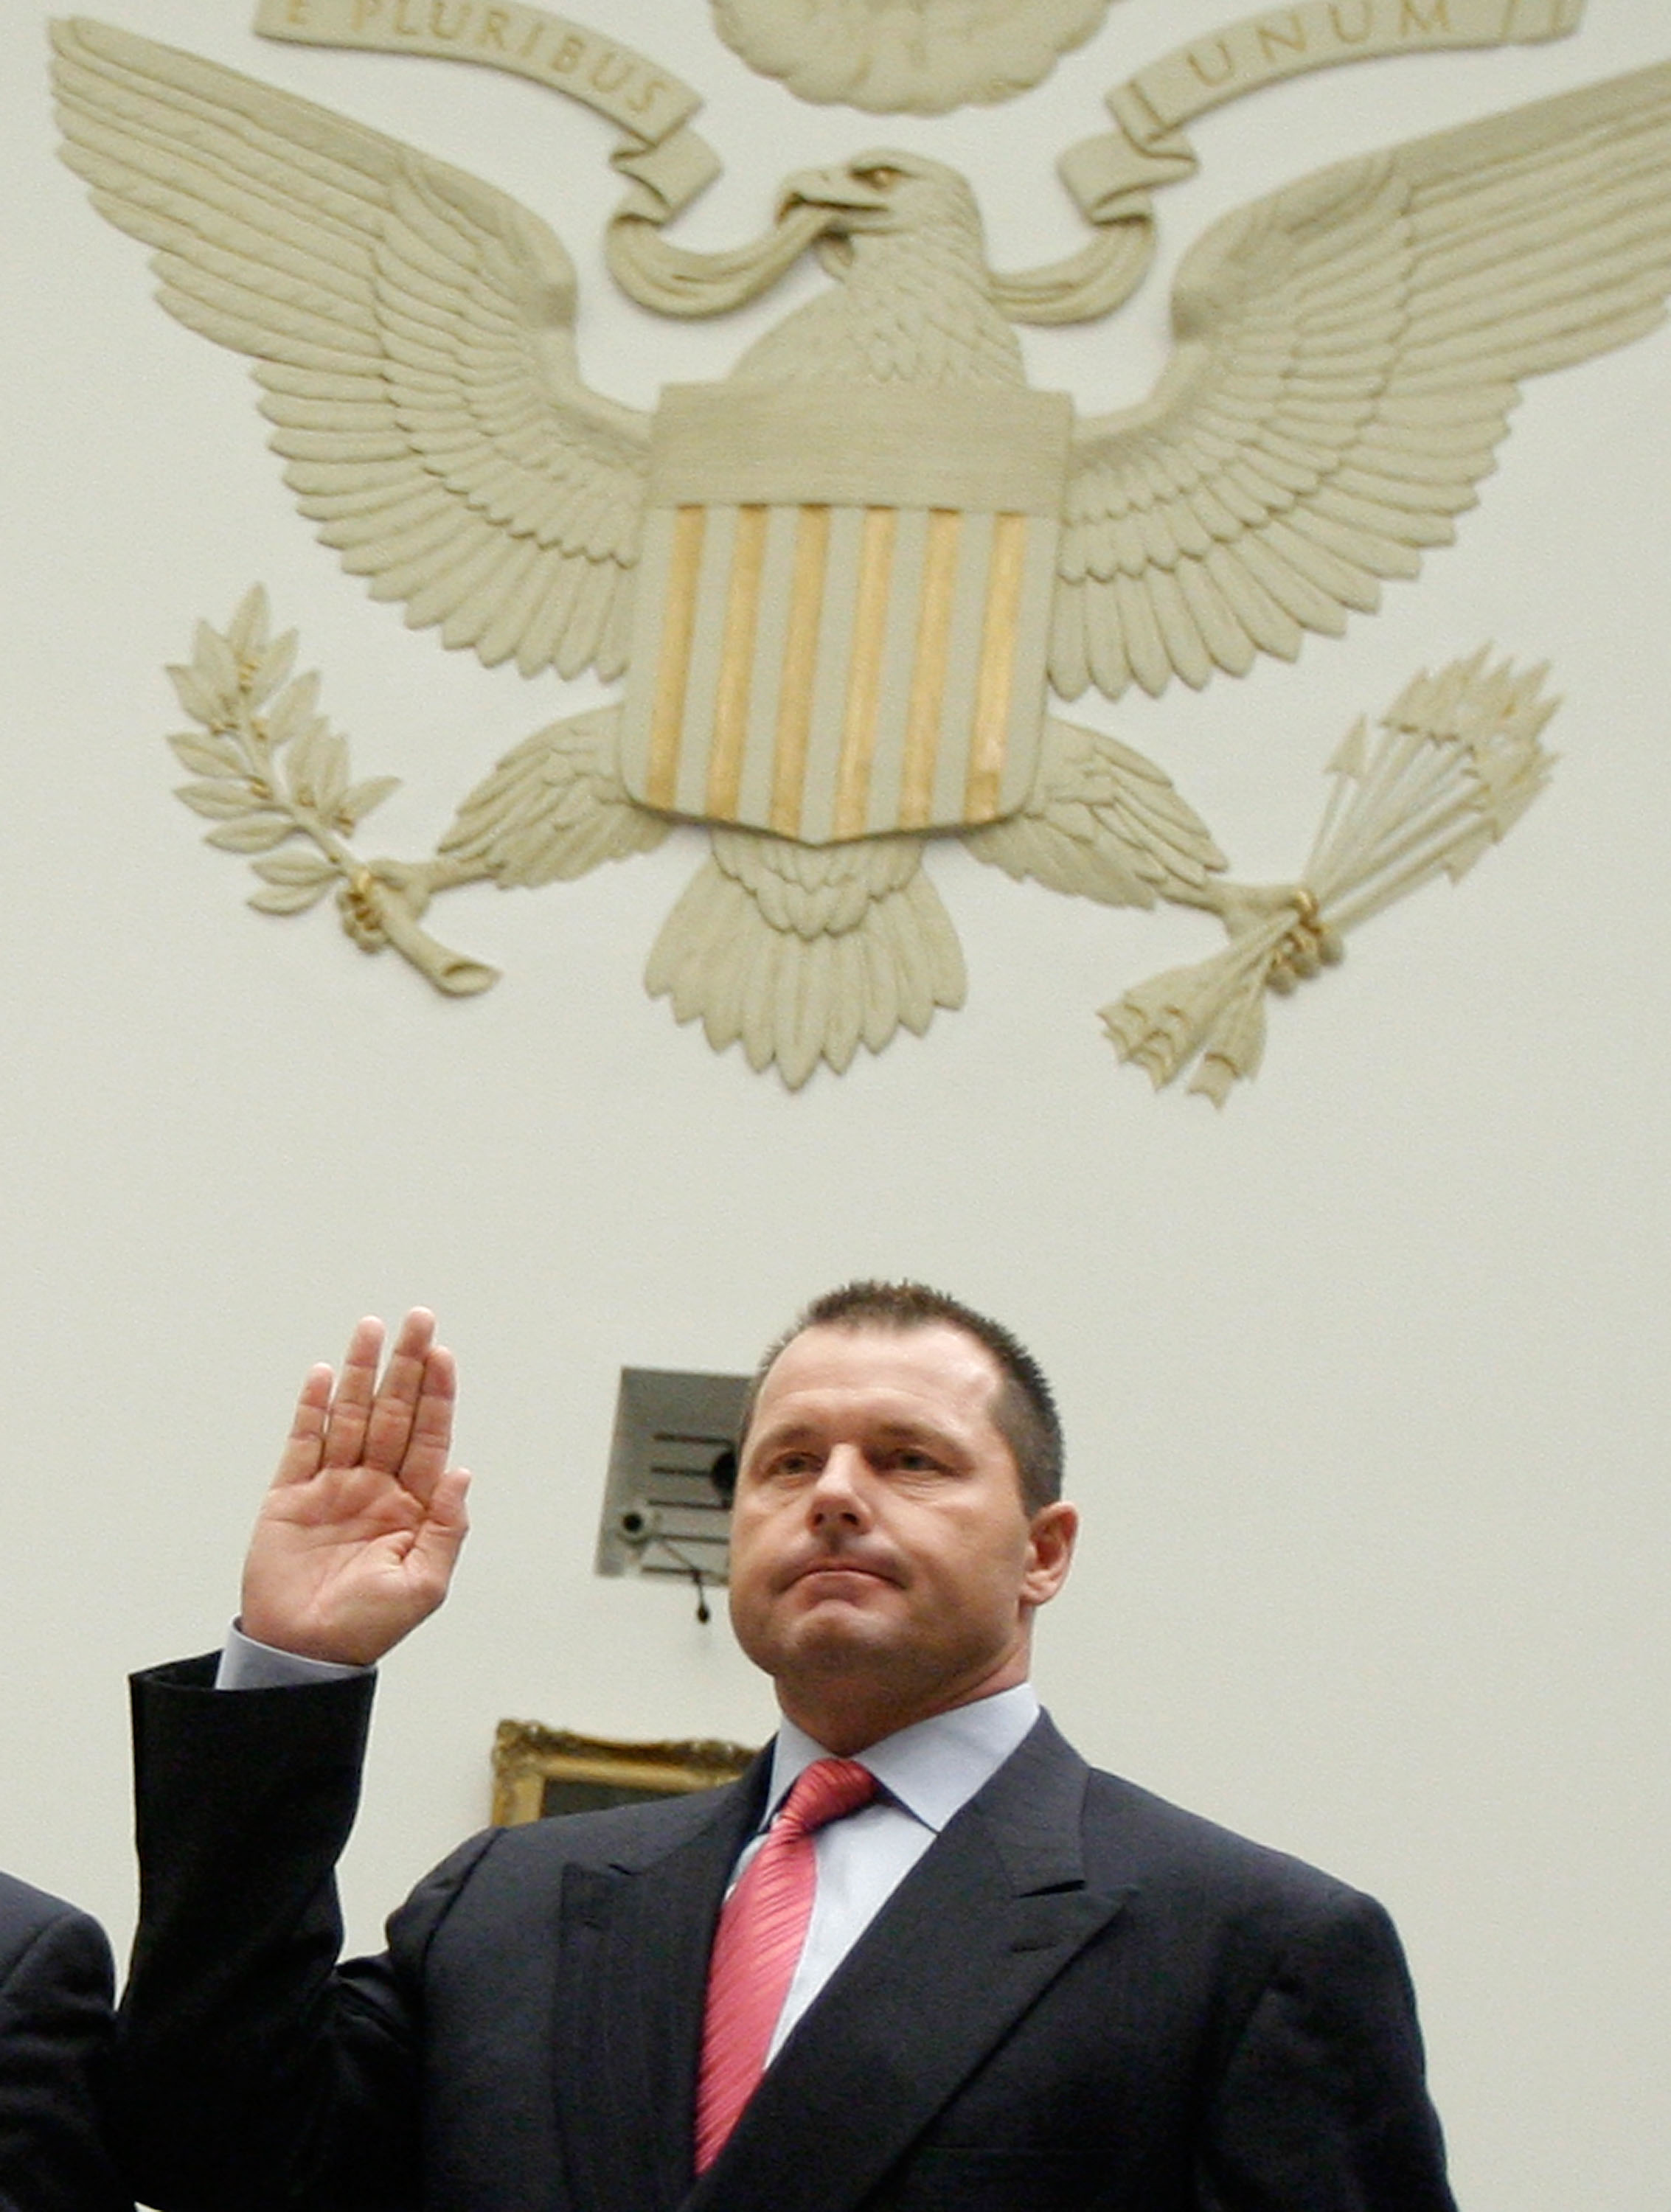 WASHINGTON - FEBRUARY 13:  Major League Baseball player Roger Clemens raises his right hand as he is sworn in during a House Oversight and Government Reform Committee, February 13, 2008 in Washington DC. The committee is hearing testimony on the use the i